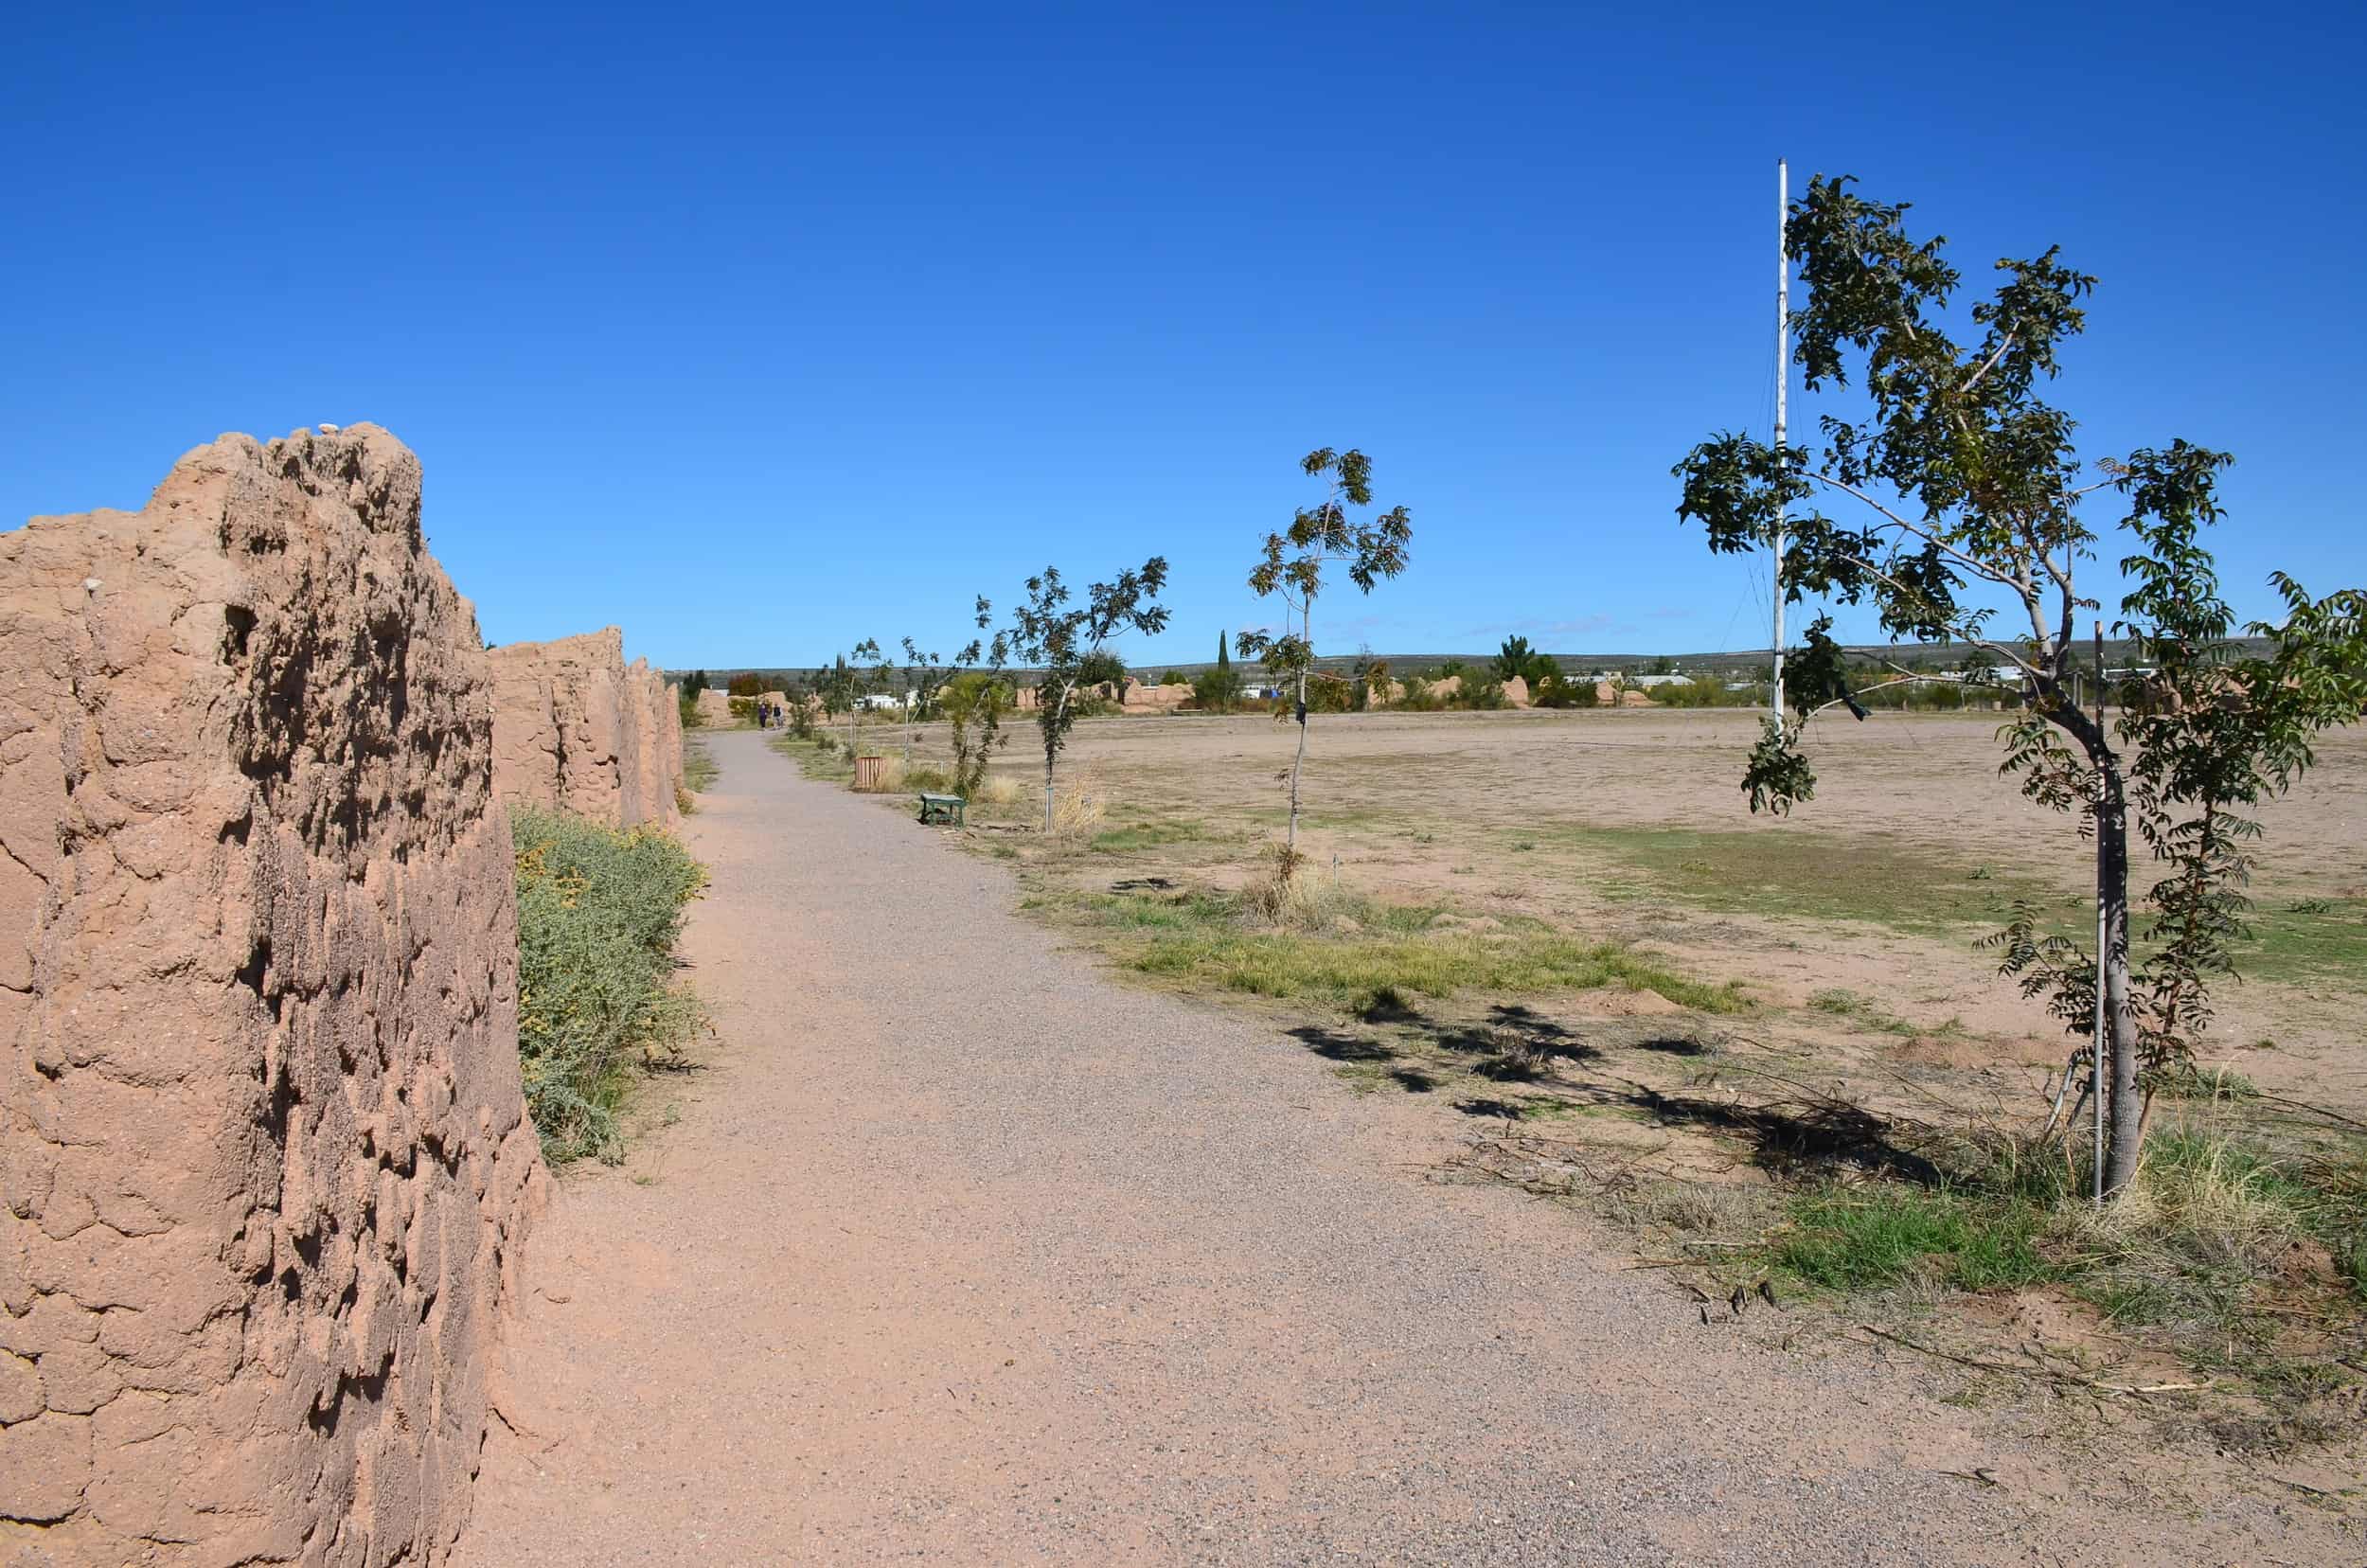 Trail through the ruins at Fort Selden Historic Site in New Mexico